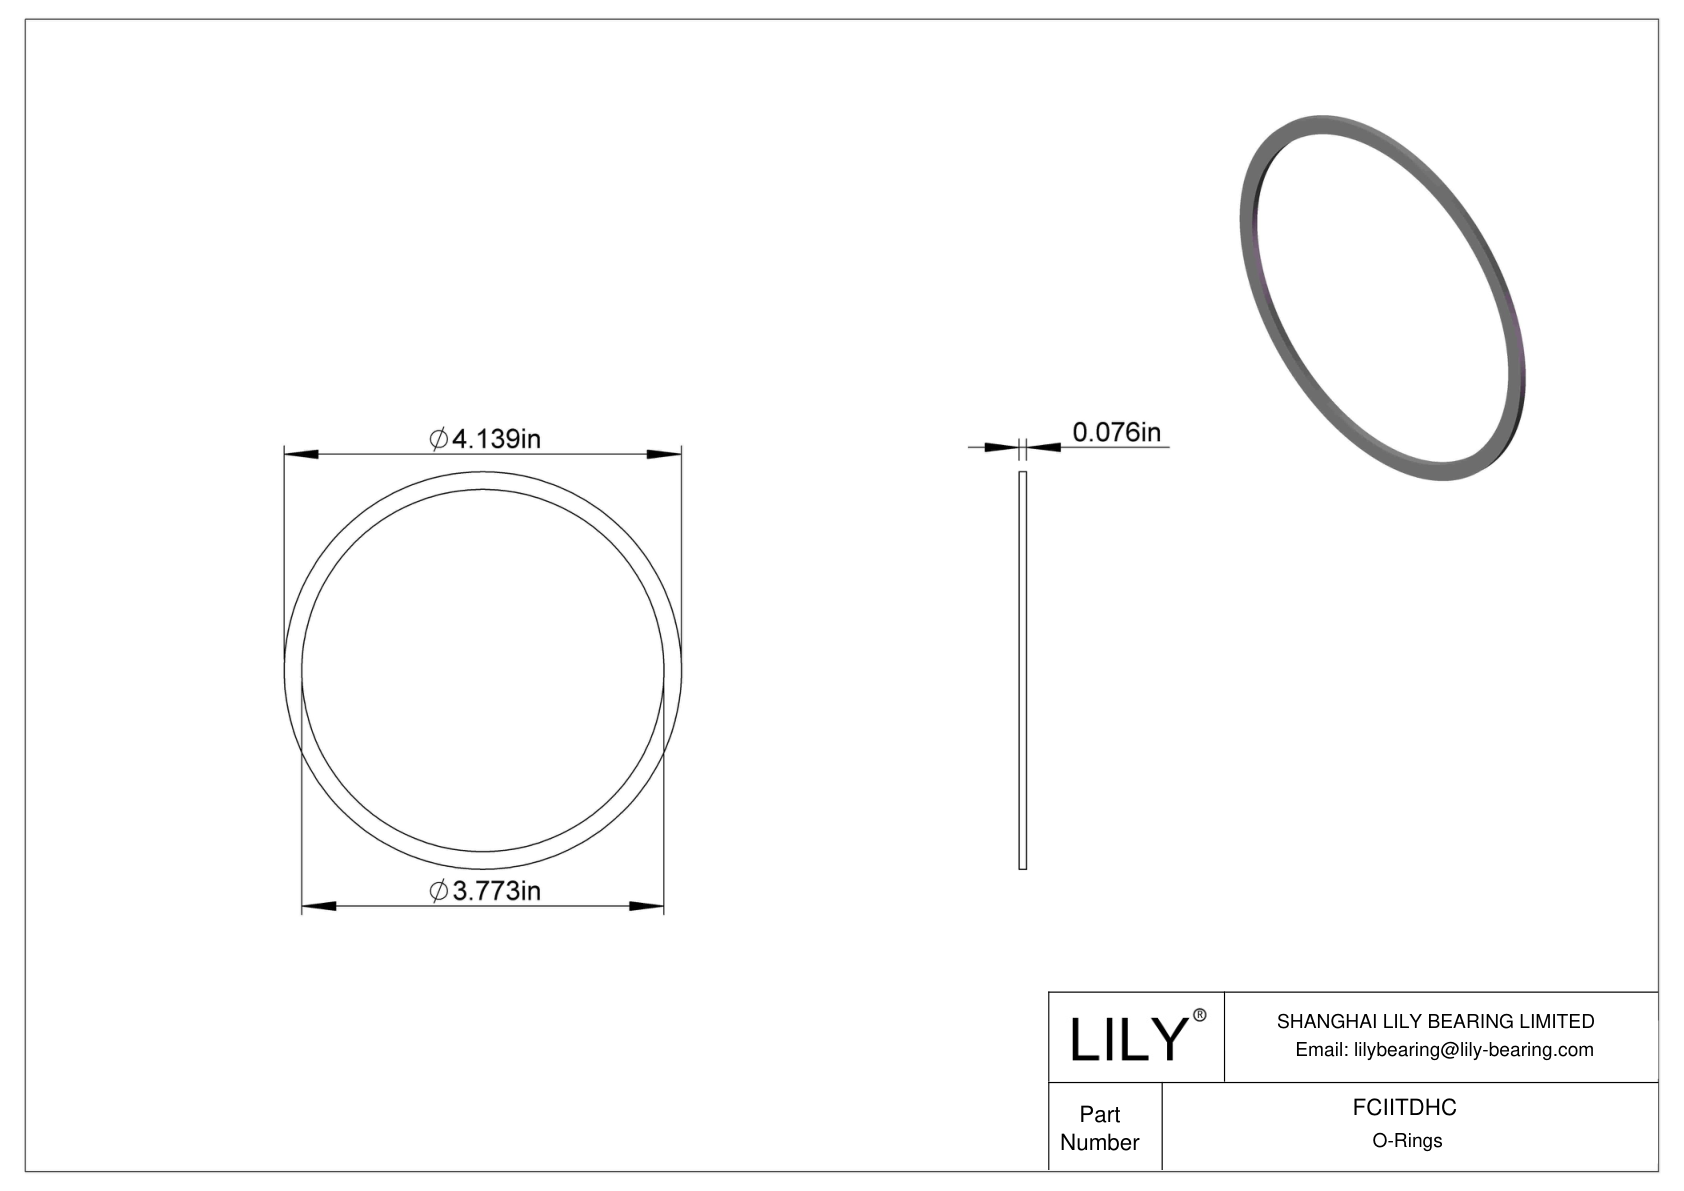 FCIITDHC O-Ring Backup Rings cad drawing